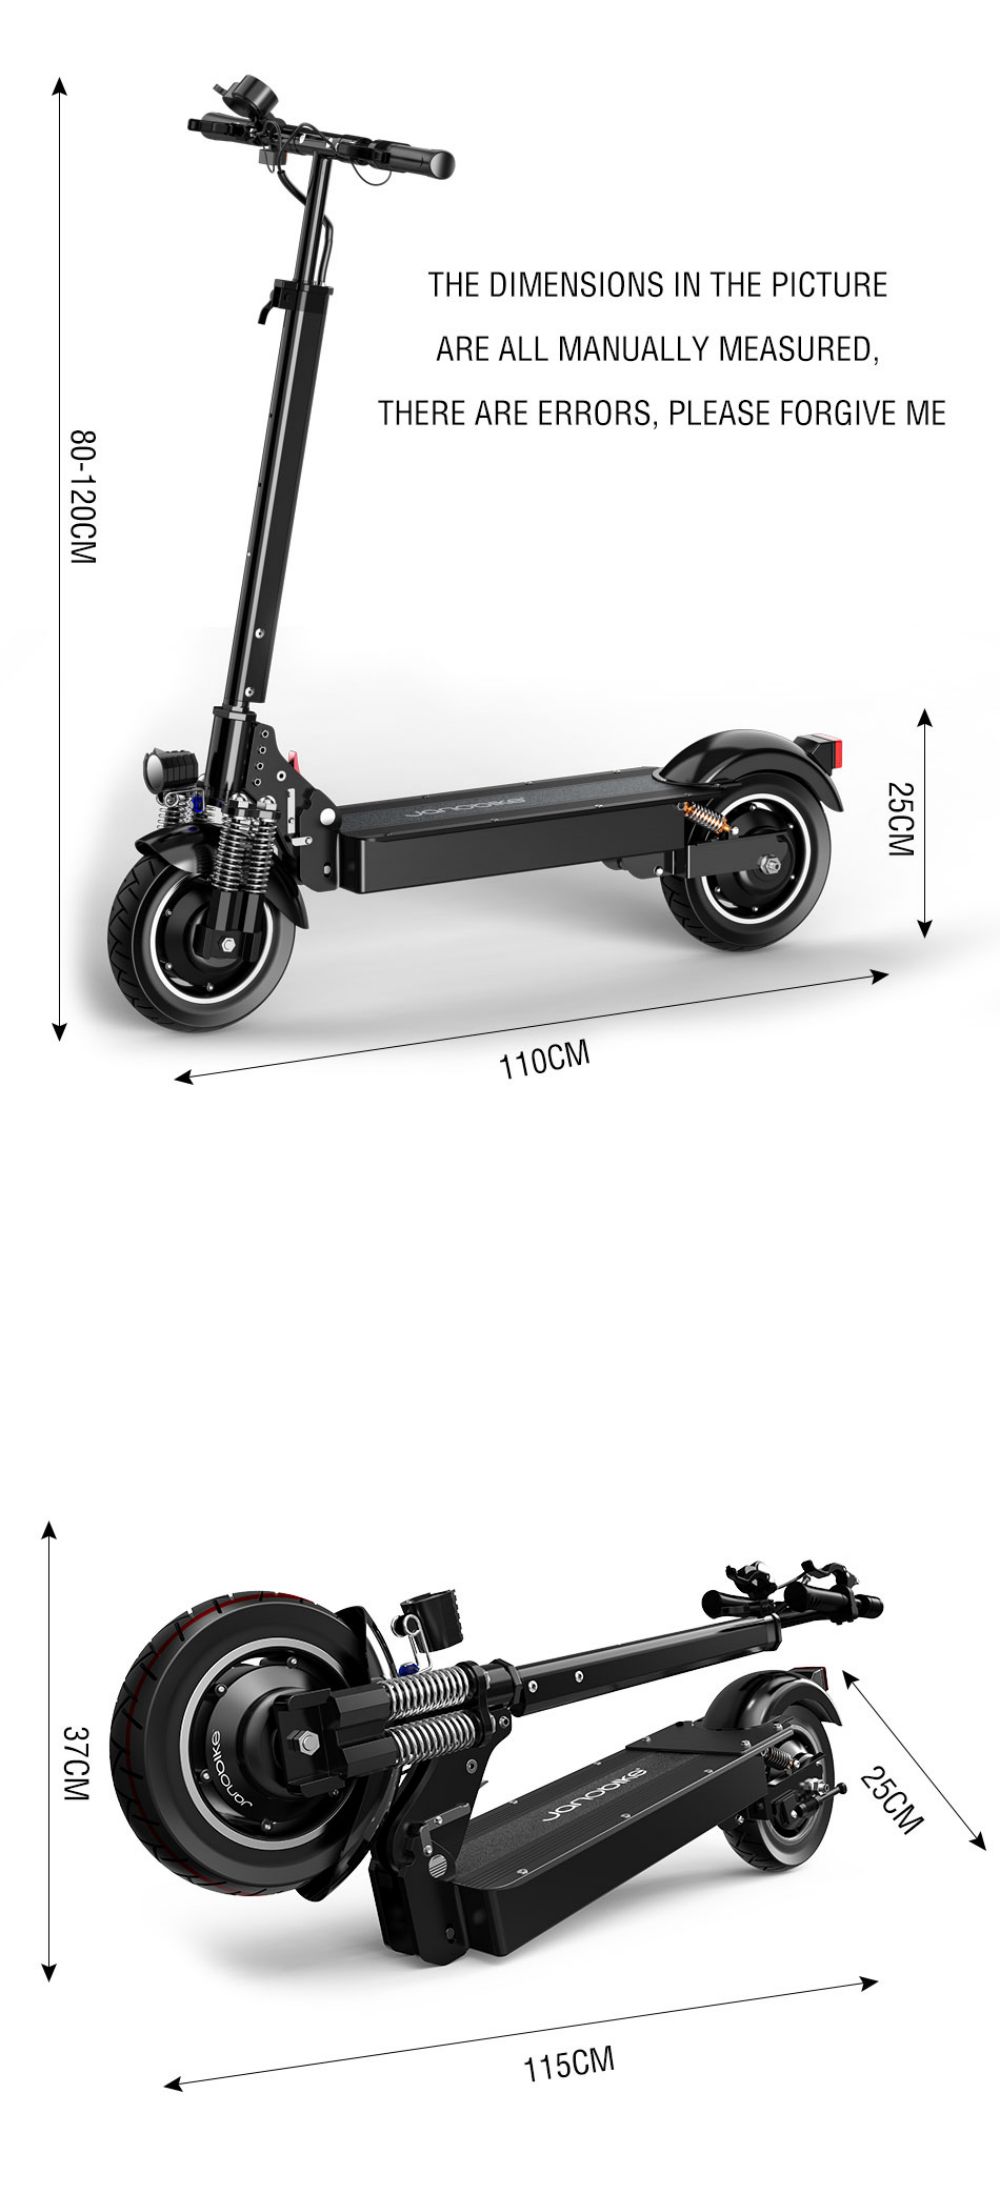 Janobike T10 Electric Scooter 10'' Rubber Tires 1000W*2 Brushless Motors 23.4Ah Battery Hydraulic Brake System